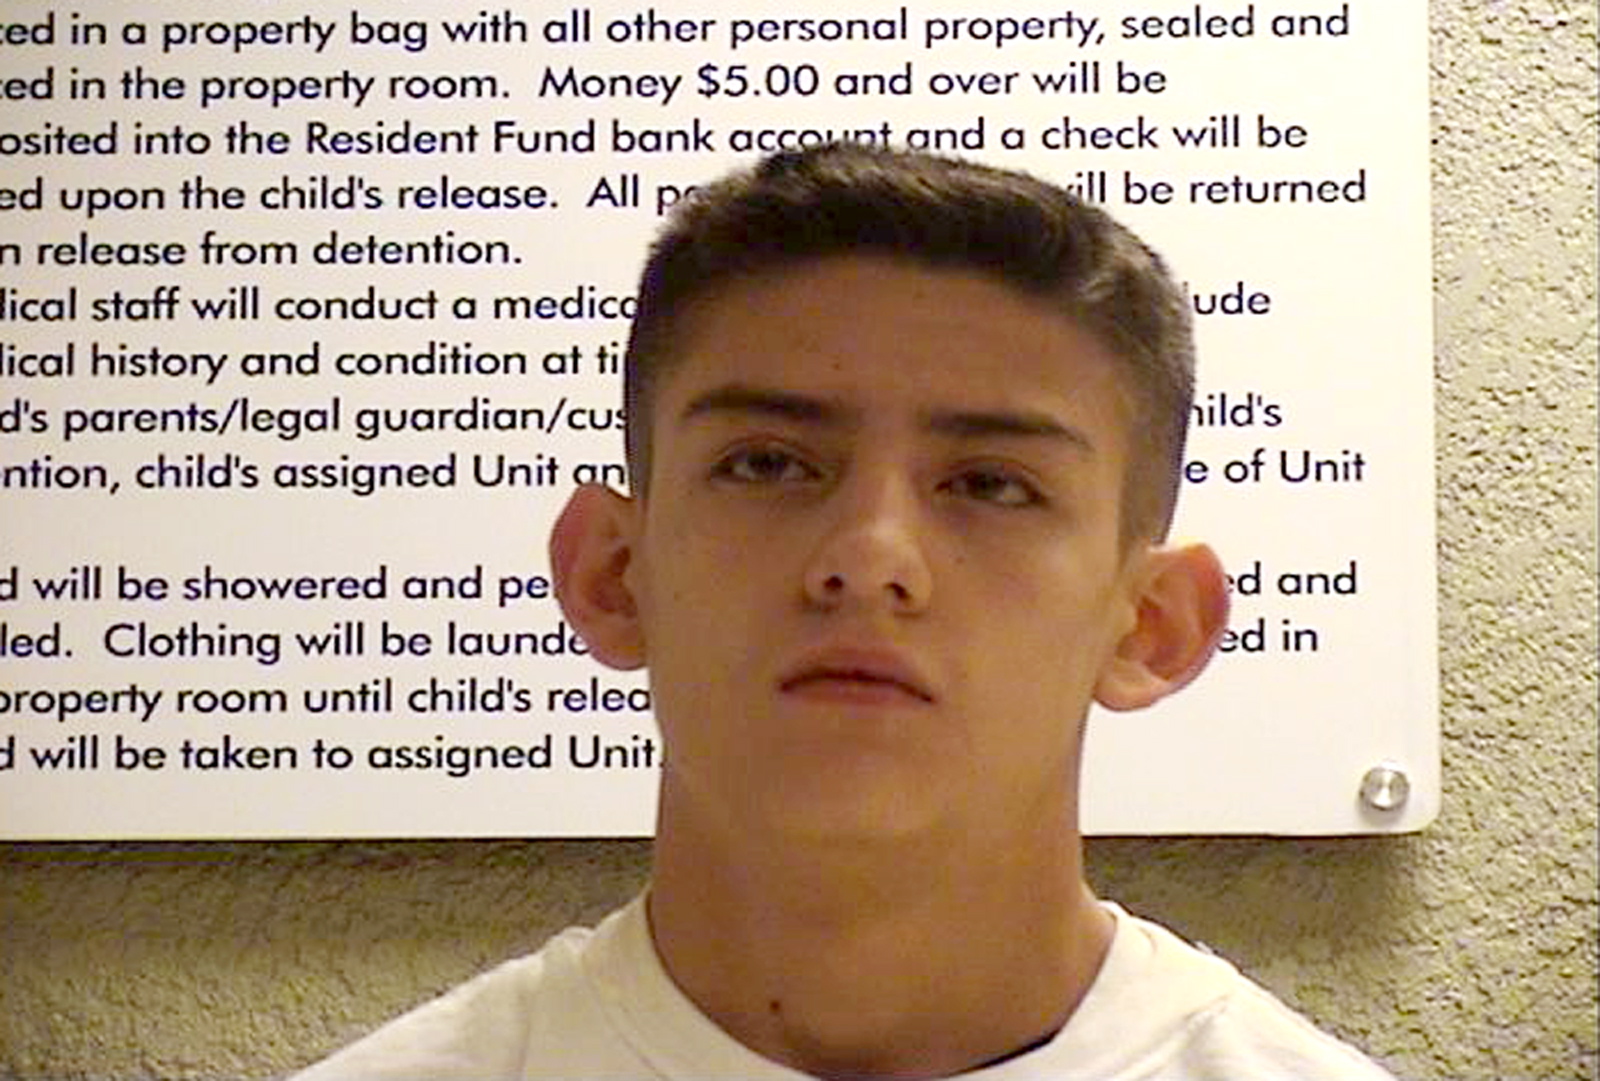 Nehemiah Griego, 15,  is seen in an undated photo provided by the Bernalillo County Sheriff's Deptartment. Griego is charged with killing five family members on Jan. 19, 2013, including his father, mother, and three youngest siblings in Albuquerque, N.M.  Authorities in New Mexico say Griego had reloaded his guns after the attacks and planned to go to a Wal-Mart and randomly shoot people. Instead, they say he texted a picture of his dead mother to his 12-year-old girlfriend, then spent much of Saturday with her. The two went to the church where his father had been a pastor, and Griego eventually confessed to killing his parents and three younger siblings.